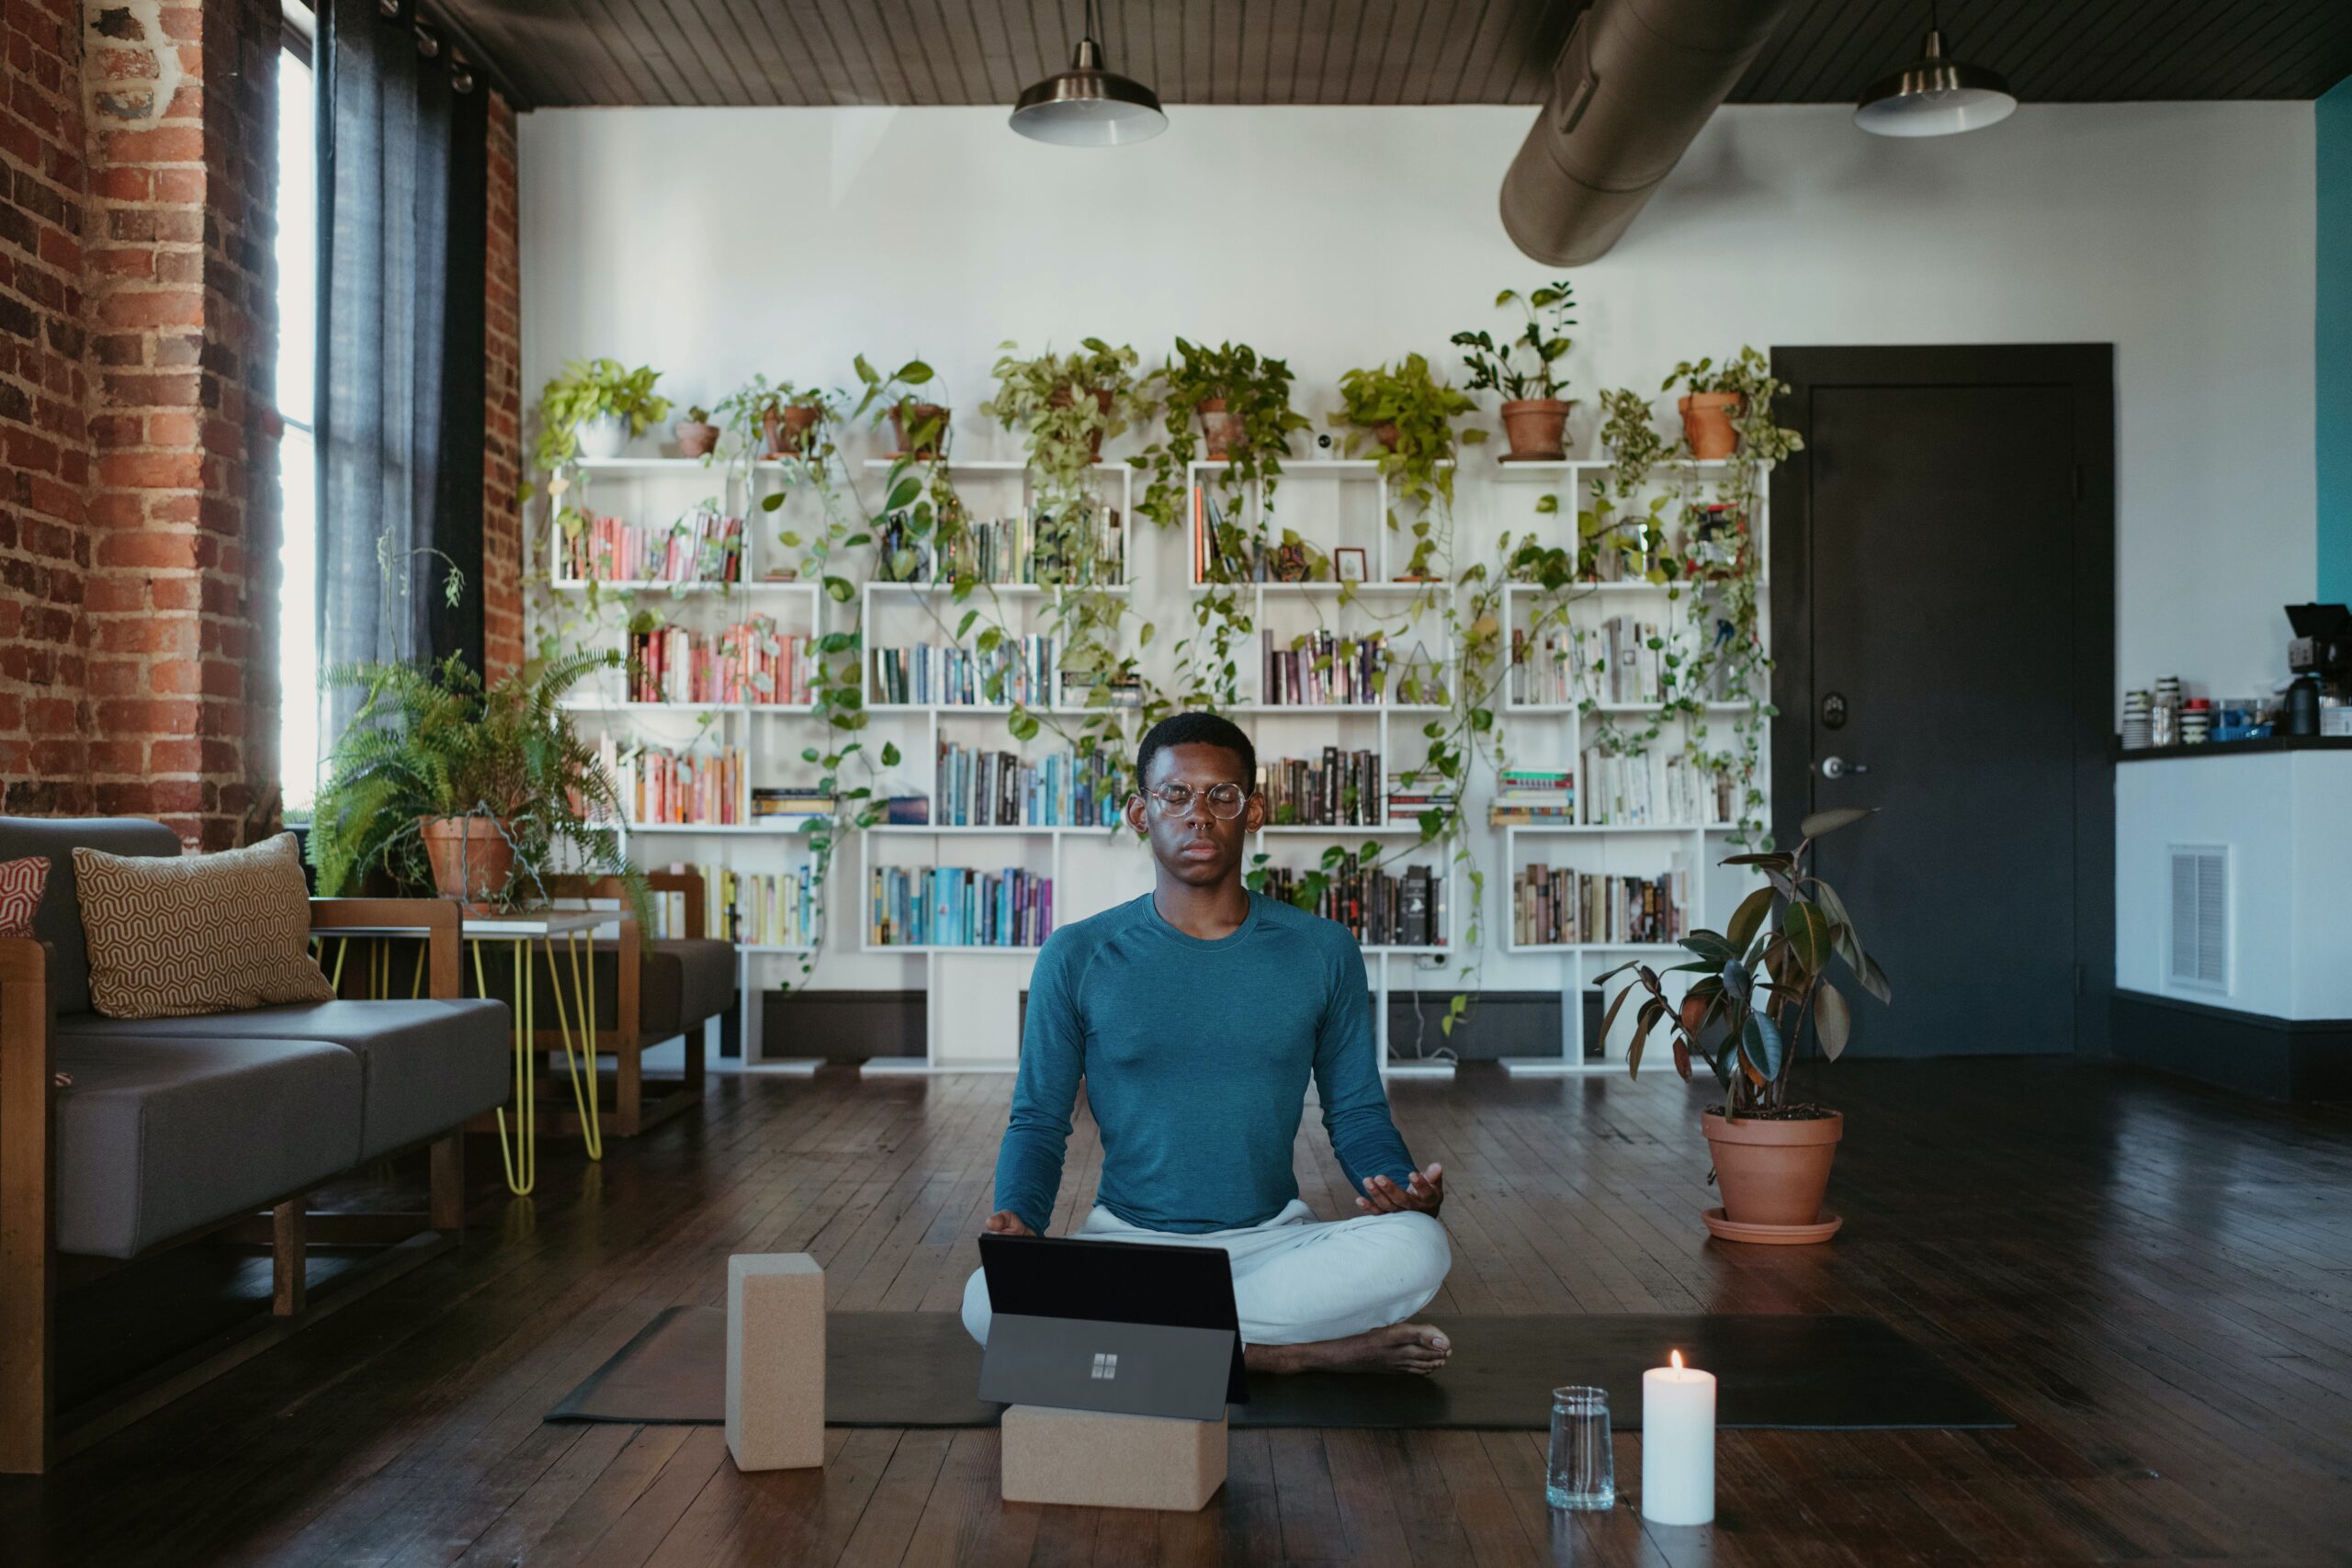 Plants are said to promote relaxation and reduce stress. Incorporate these into your zen meditation room for peaceful and mindful meditation. Pictured: A man doing yoga with plants in the background.